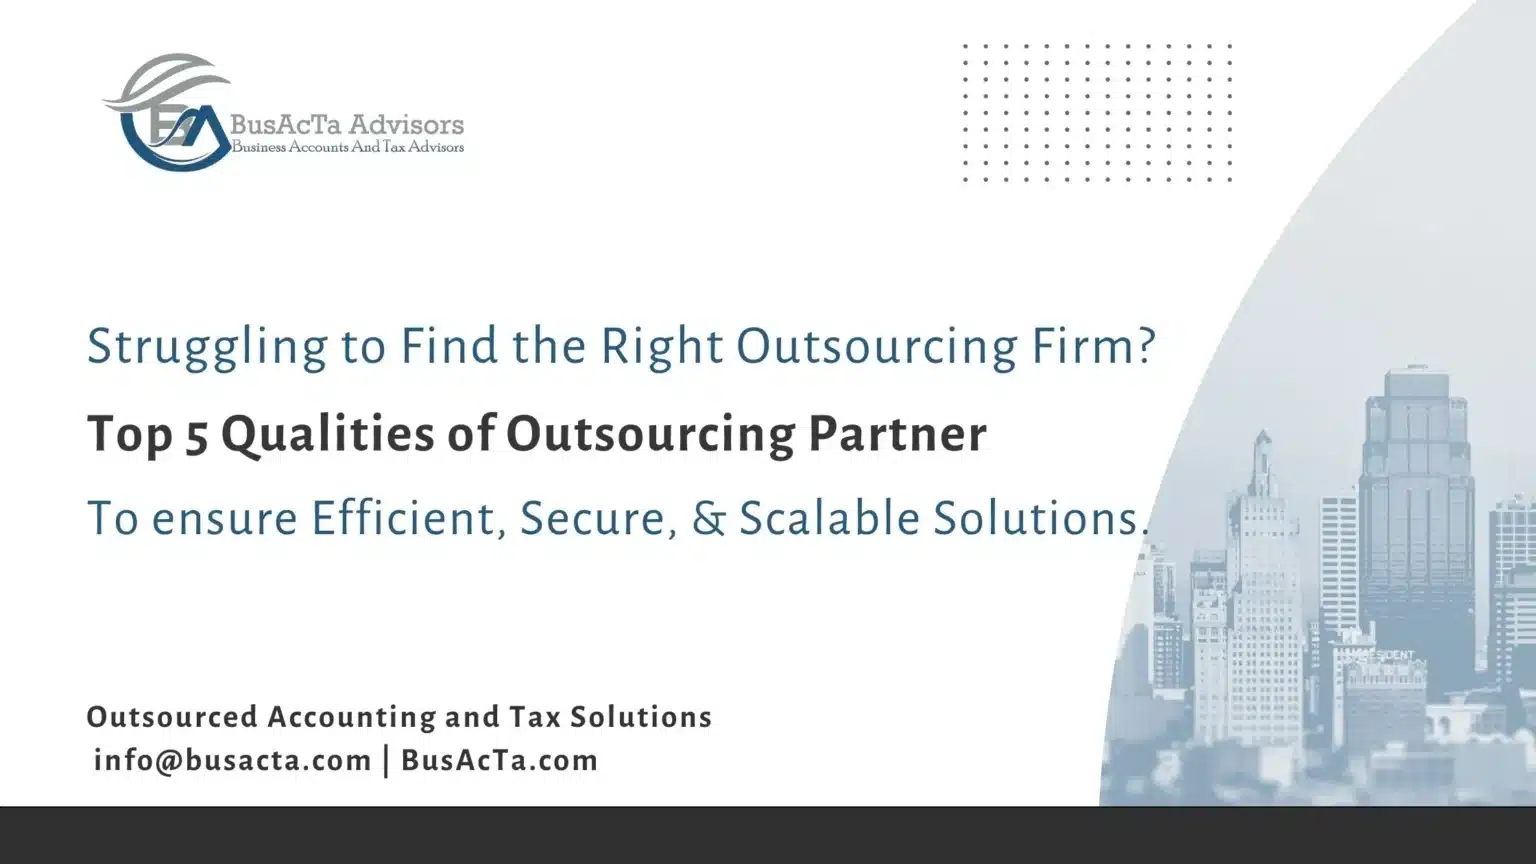 Features of the Right Offshore Accounting Firm